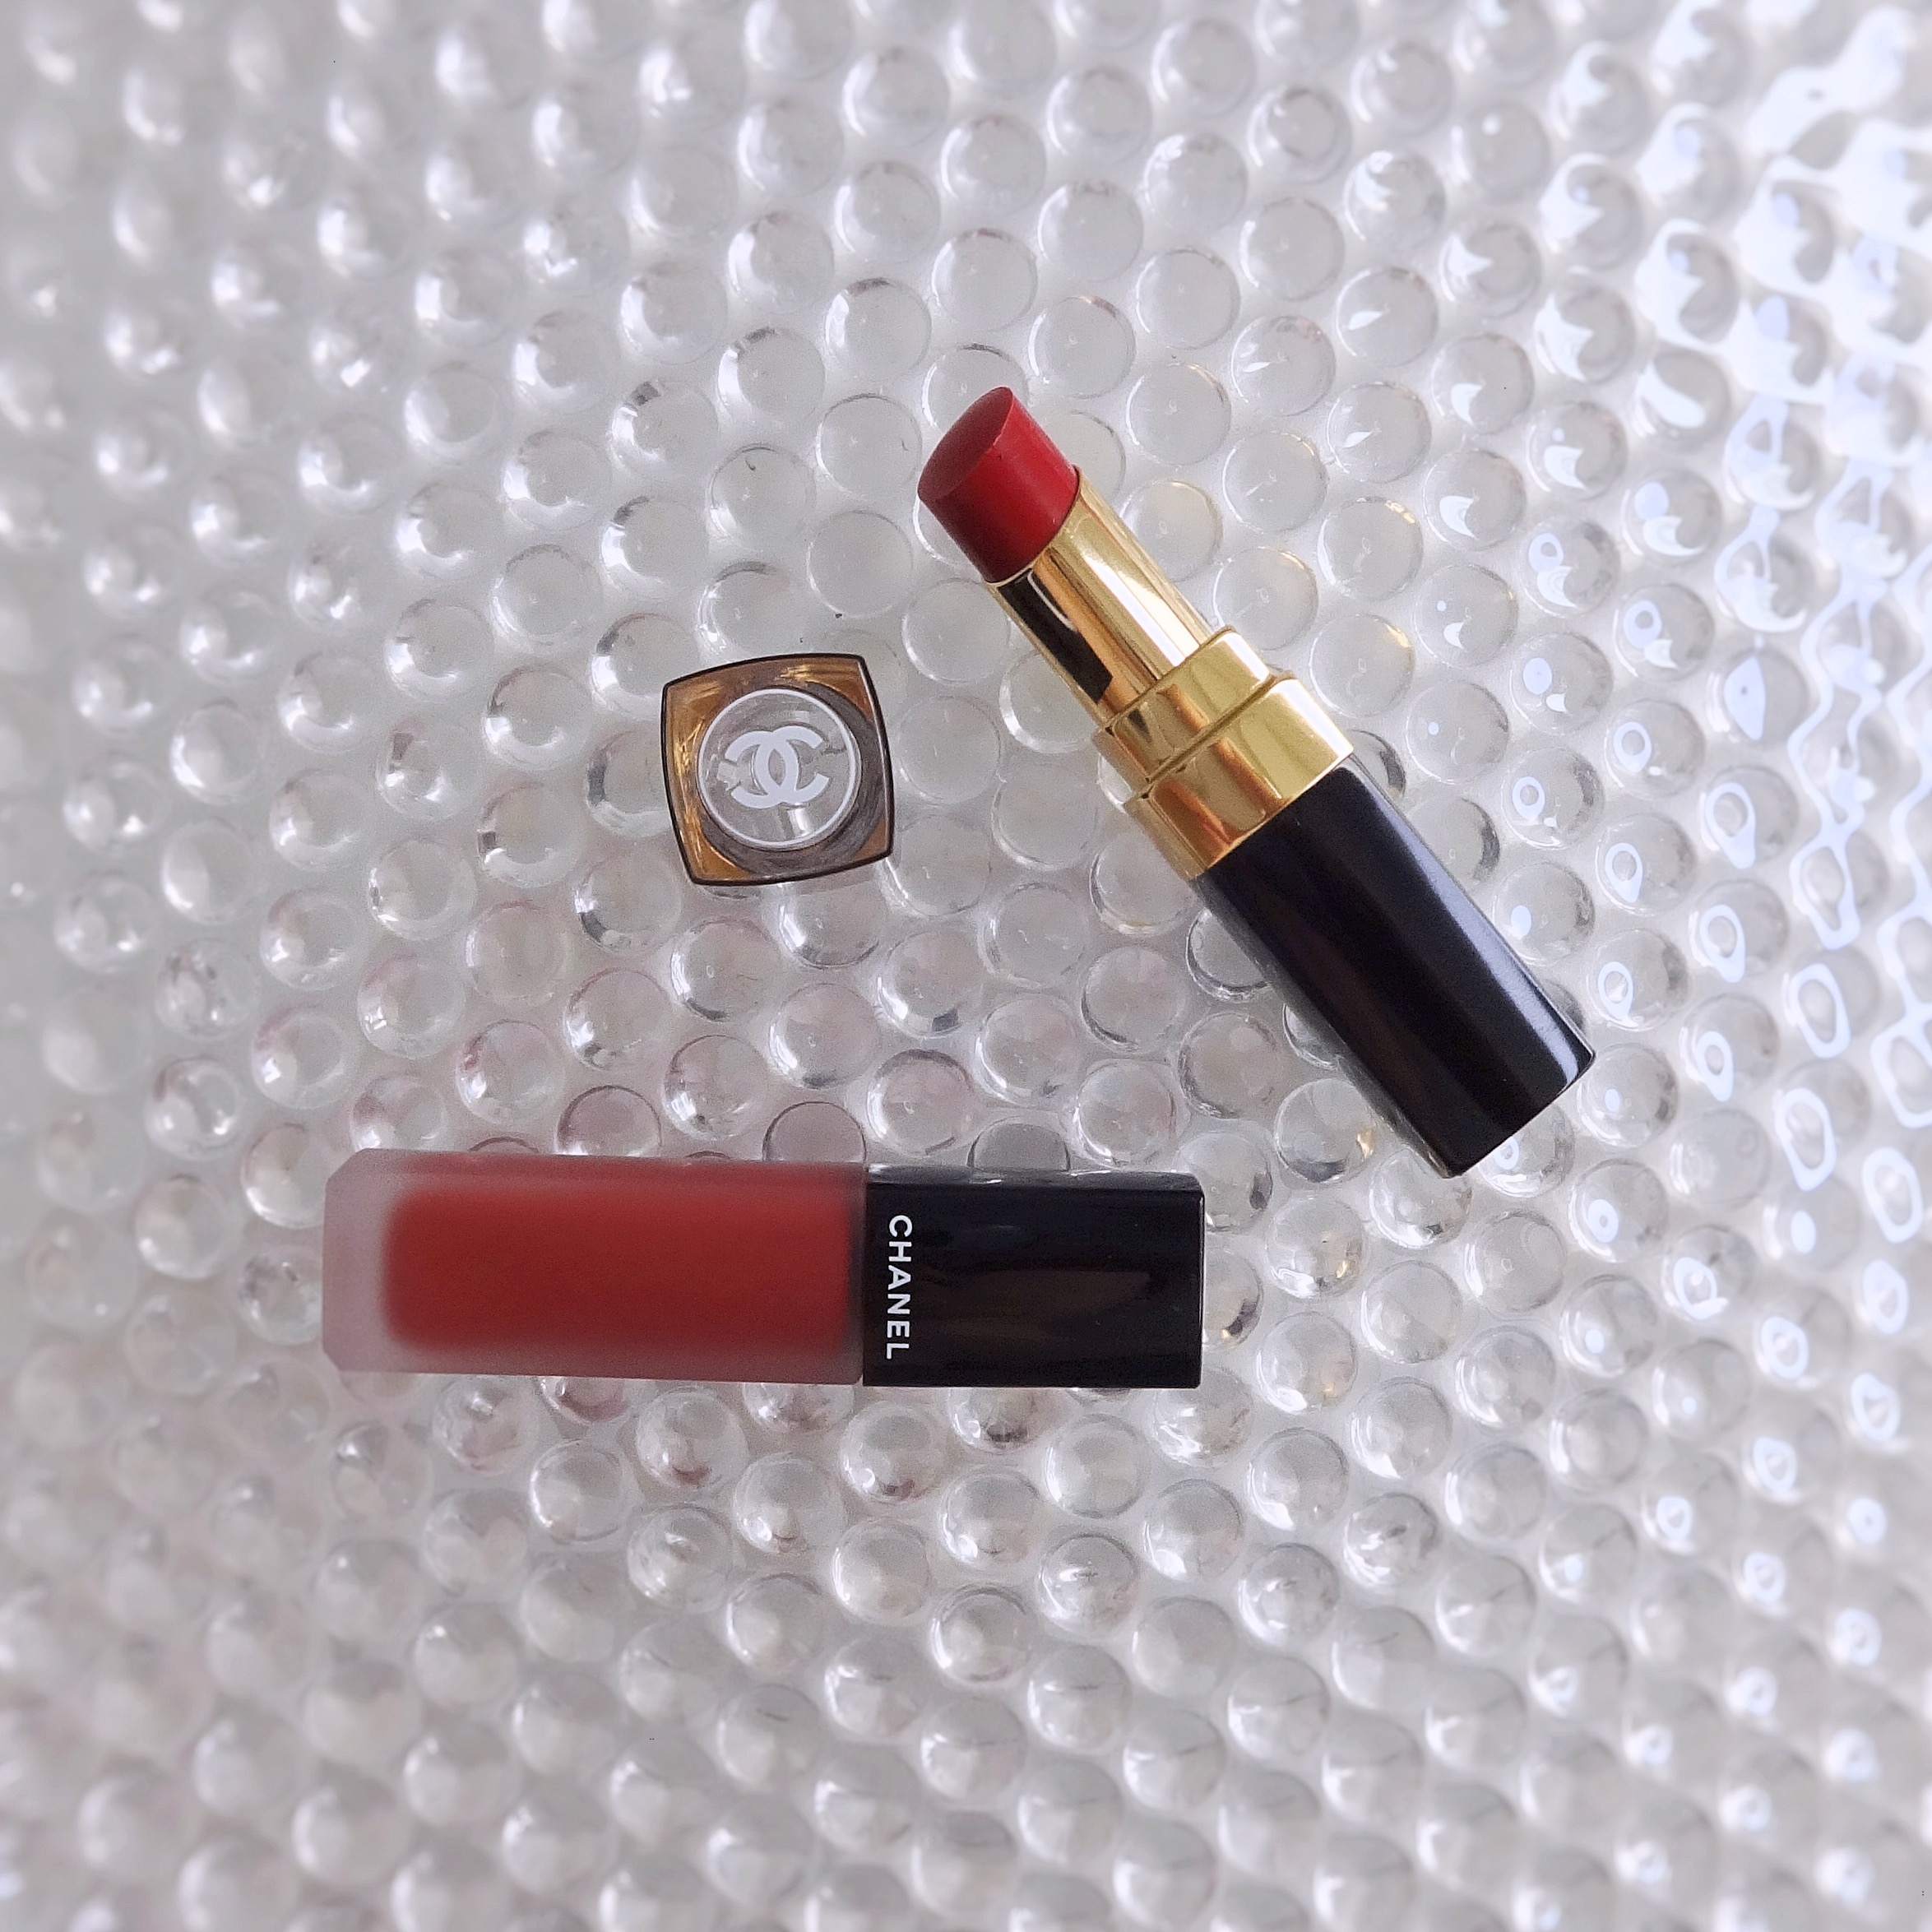 Chanel Reve de Chanel Collection review swatches